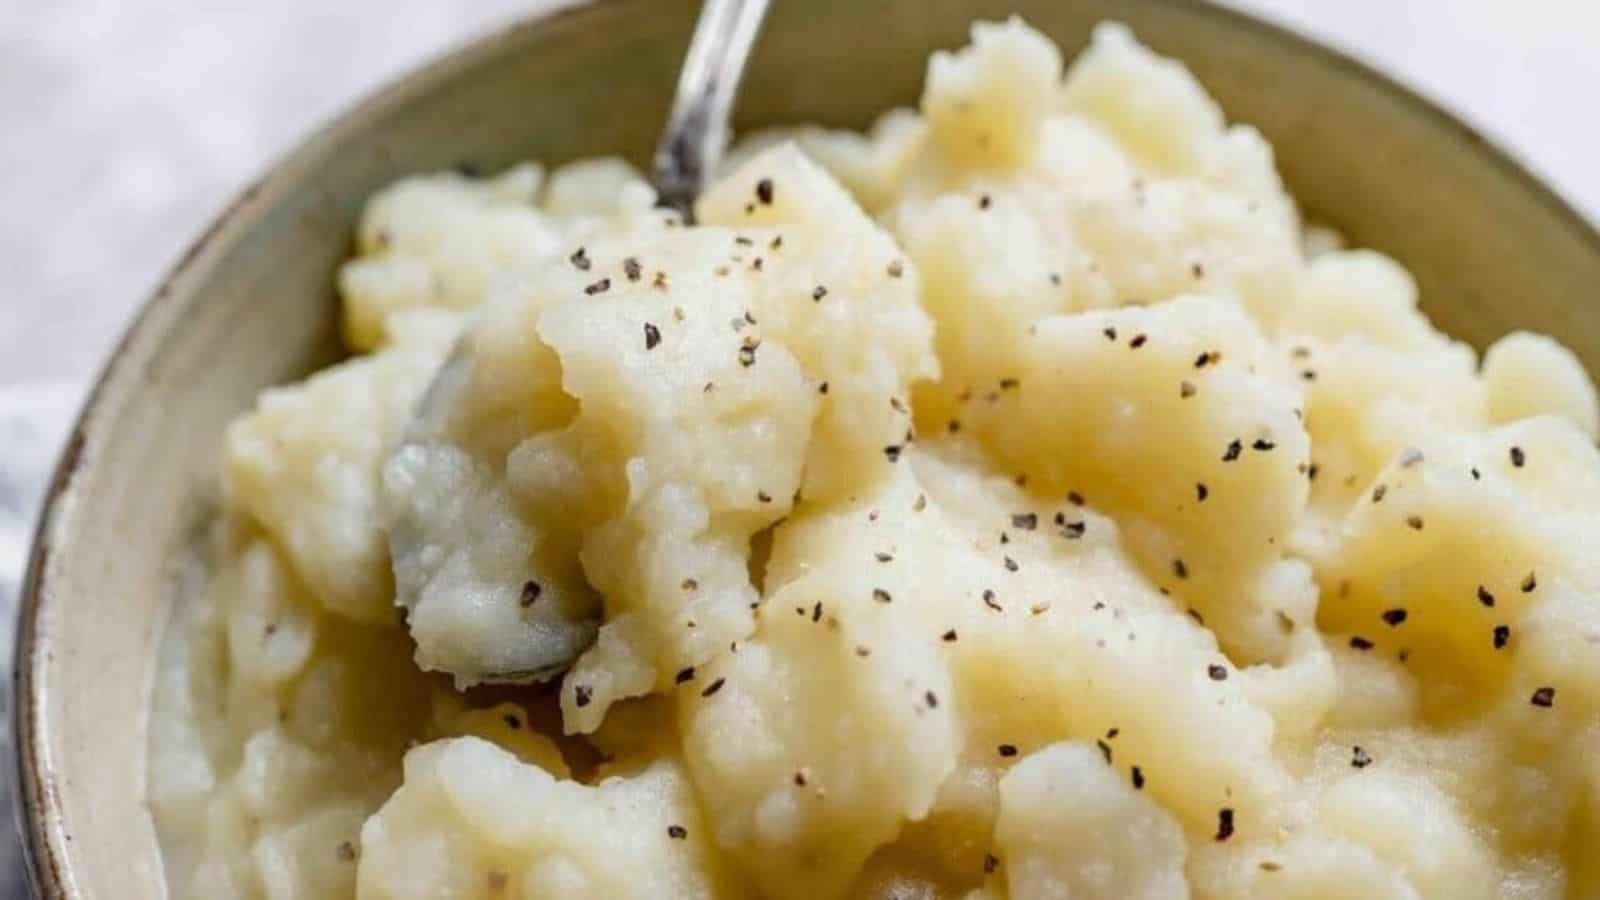 Close shot of a bowl of white stewed potatoes topped with black pepper.